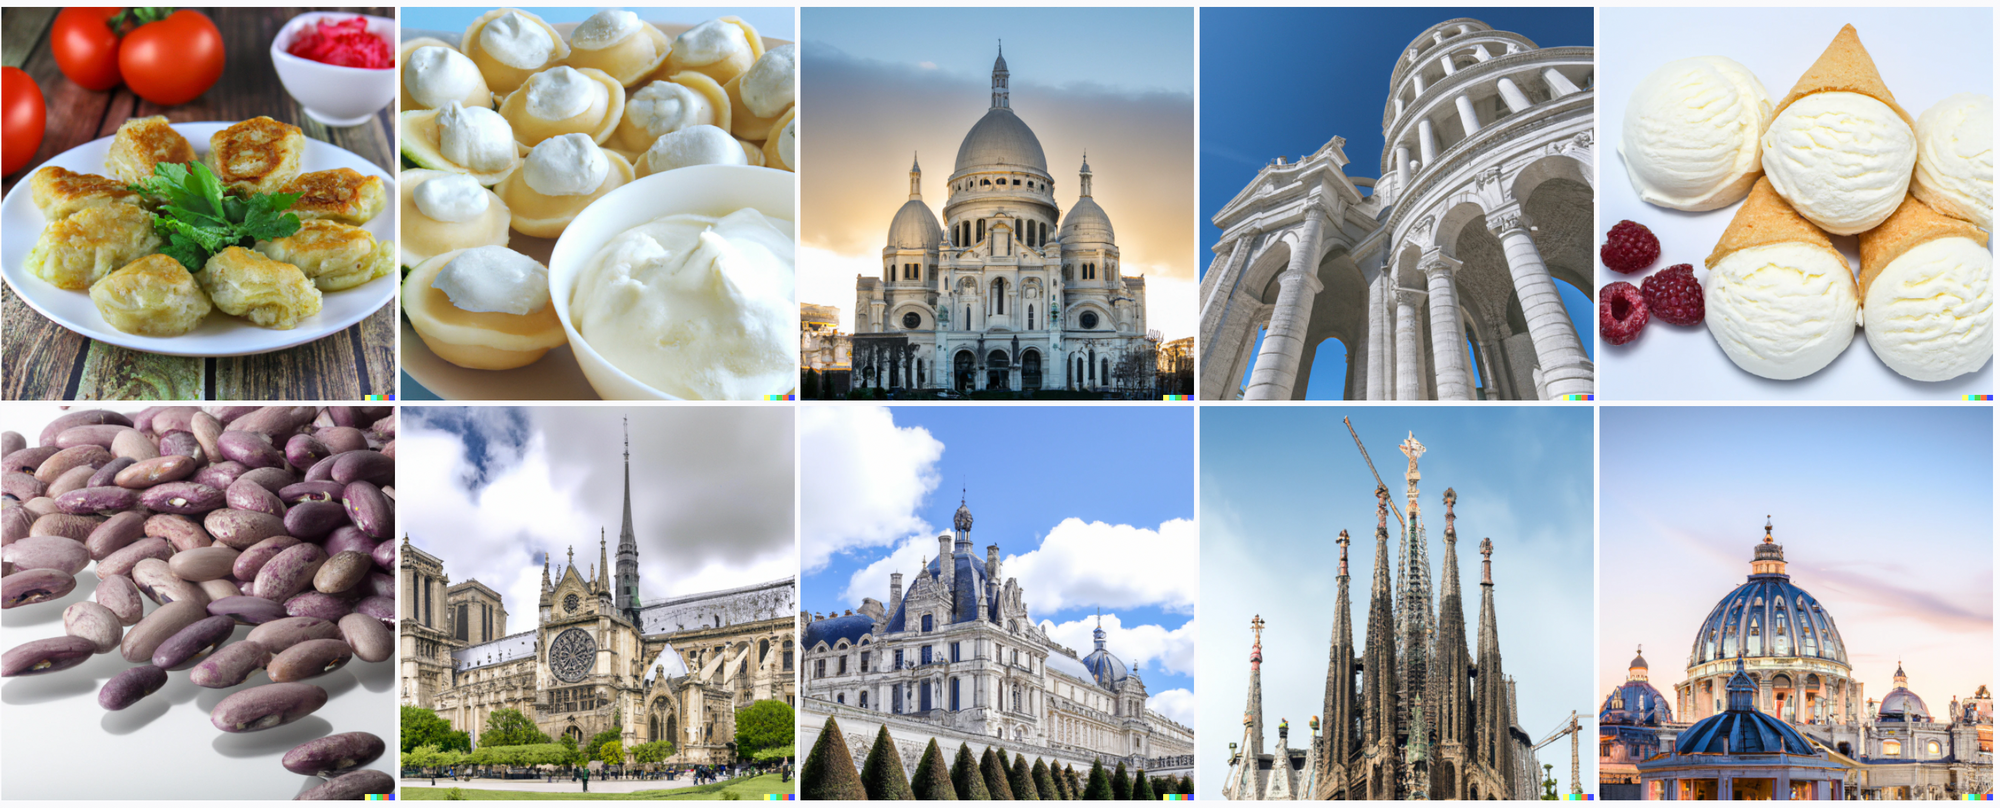 The Taj Mahal, Sainte Chappelle, Notre Dame, L'Hotel de Ville, and some other fancy european domed landmark. Interspersed with pinto beans, ice cream cones lying on the table, cream covered tartlets, and potstickers